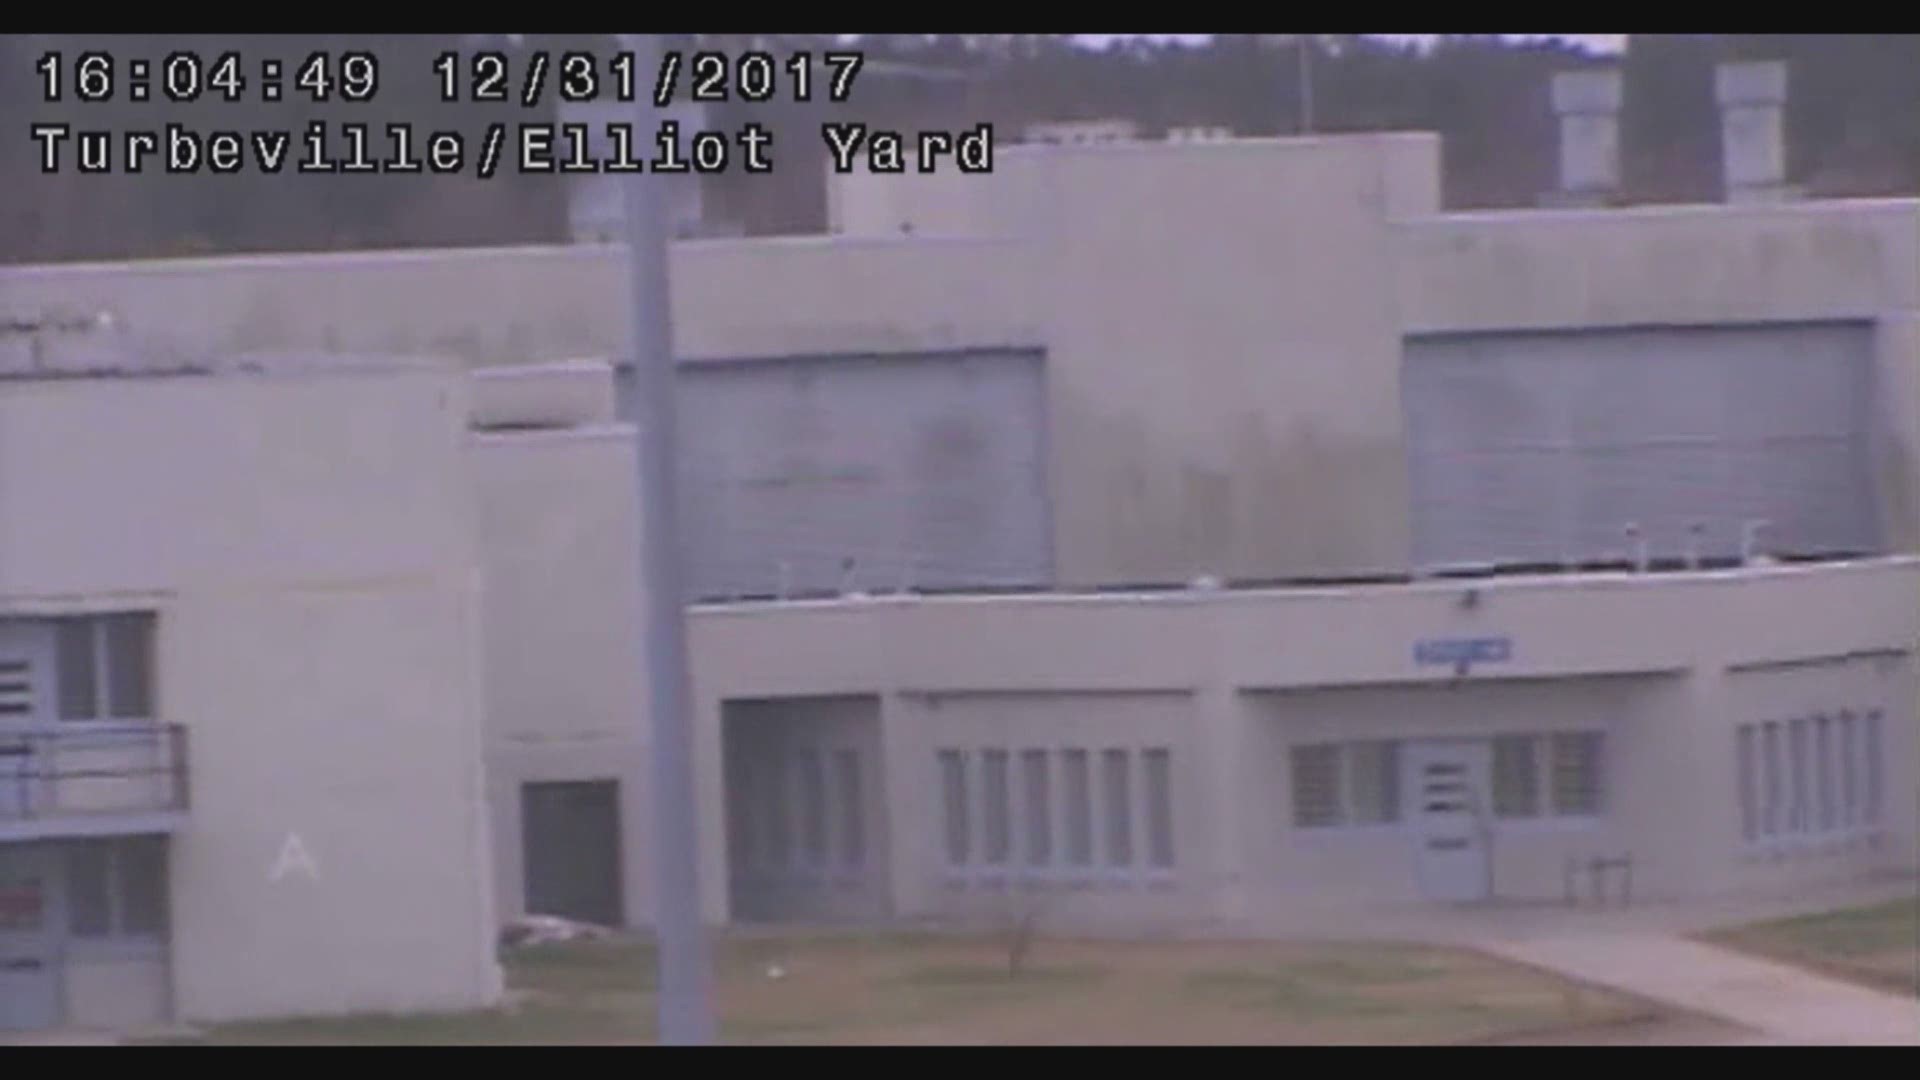 Attorneys release video they say shows corrections employees failing to seek treatment for an inmate who had been stabbed multiple times.